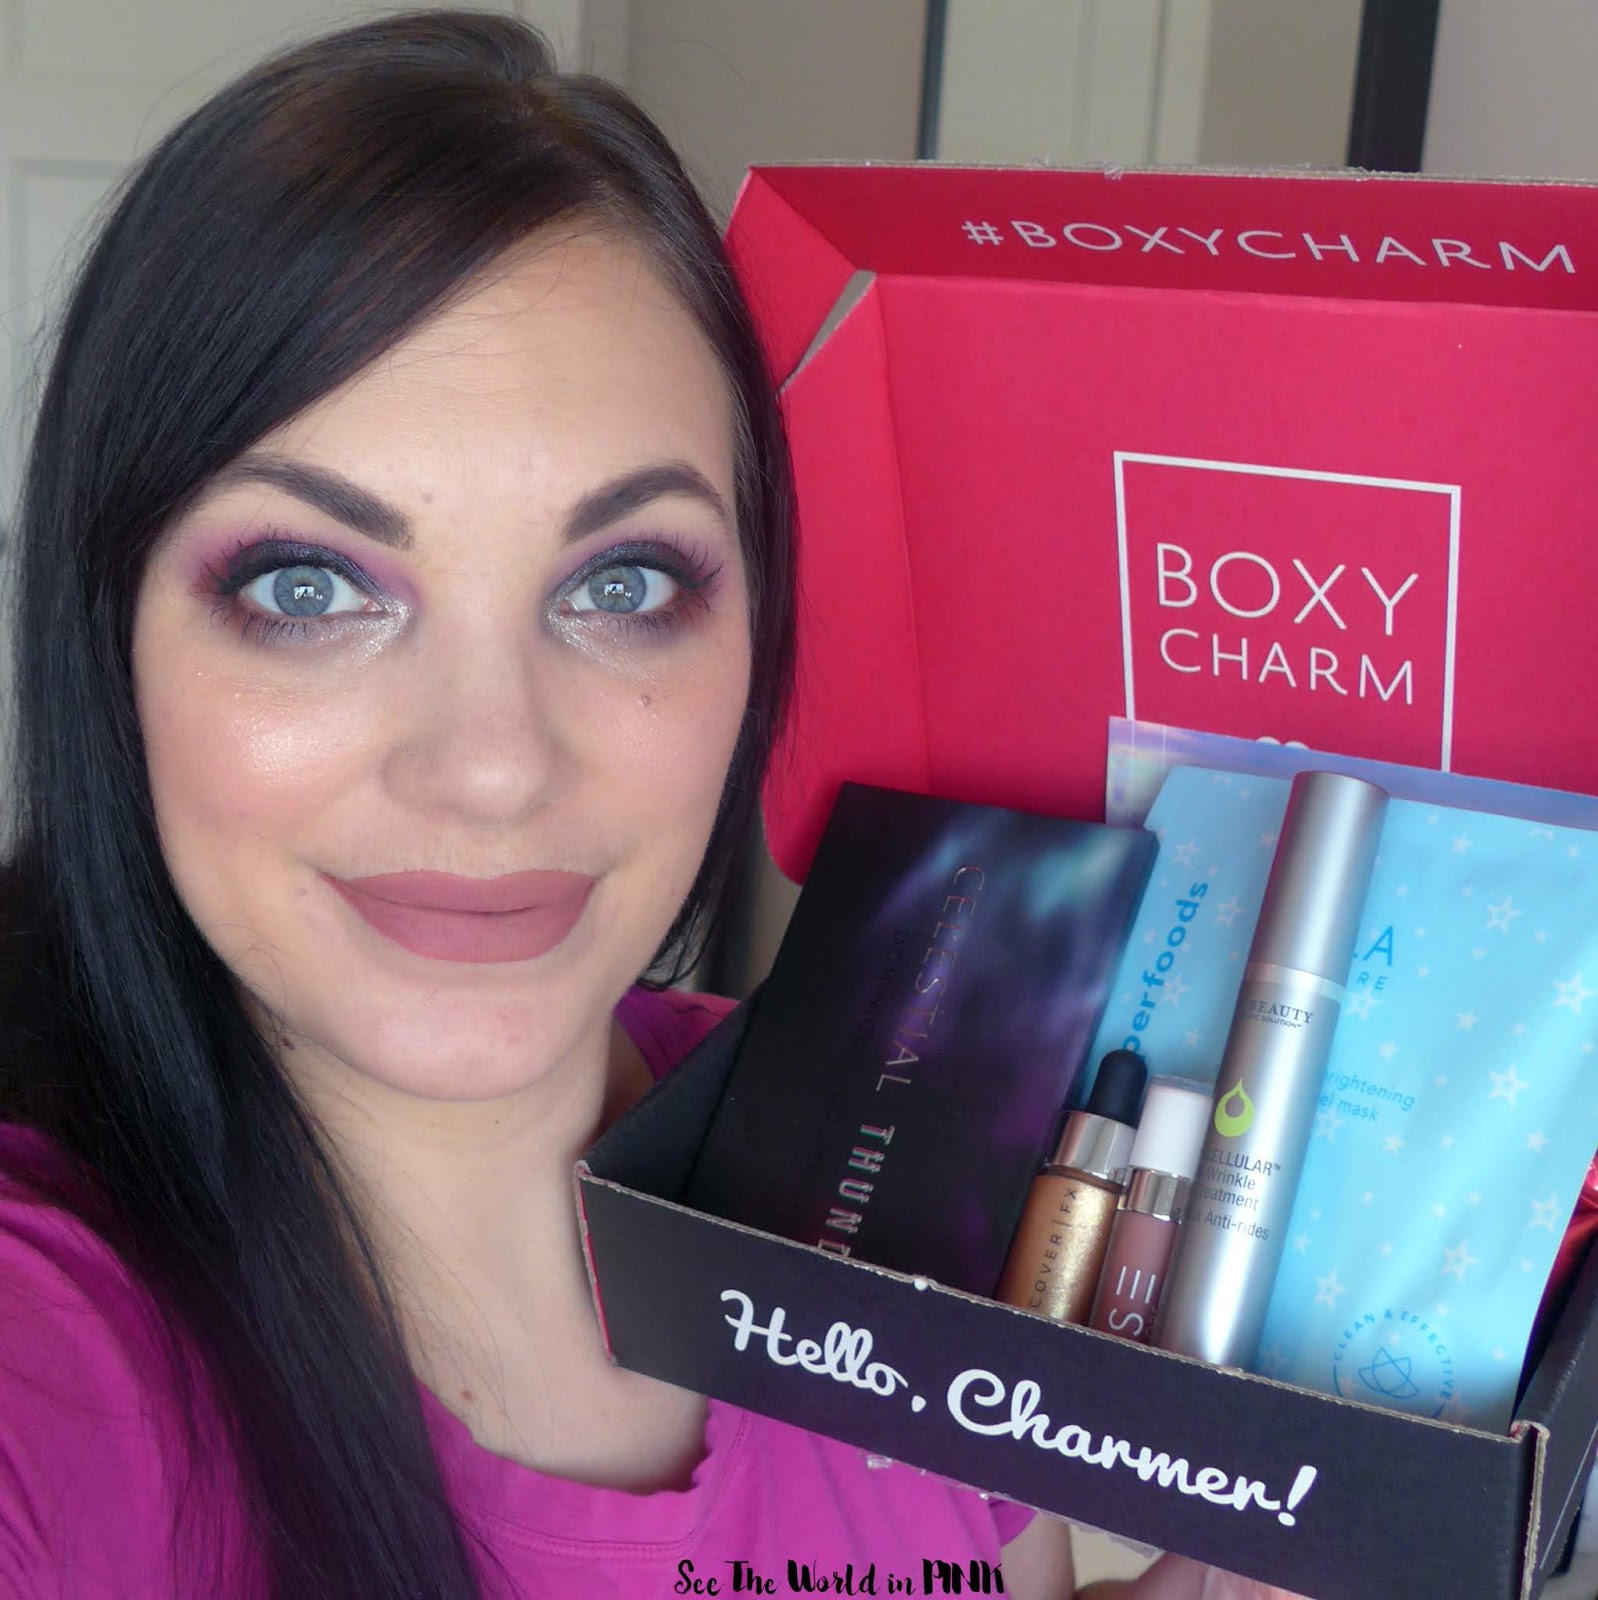 November 2019 Boxycharm - Unboxing, Swatches, Review, and Full Make-up Look!